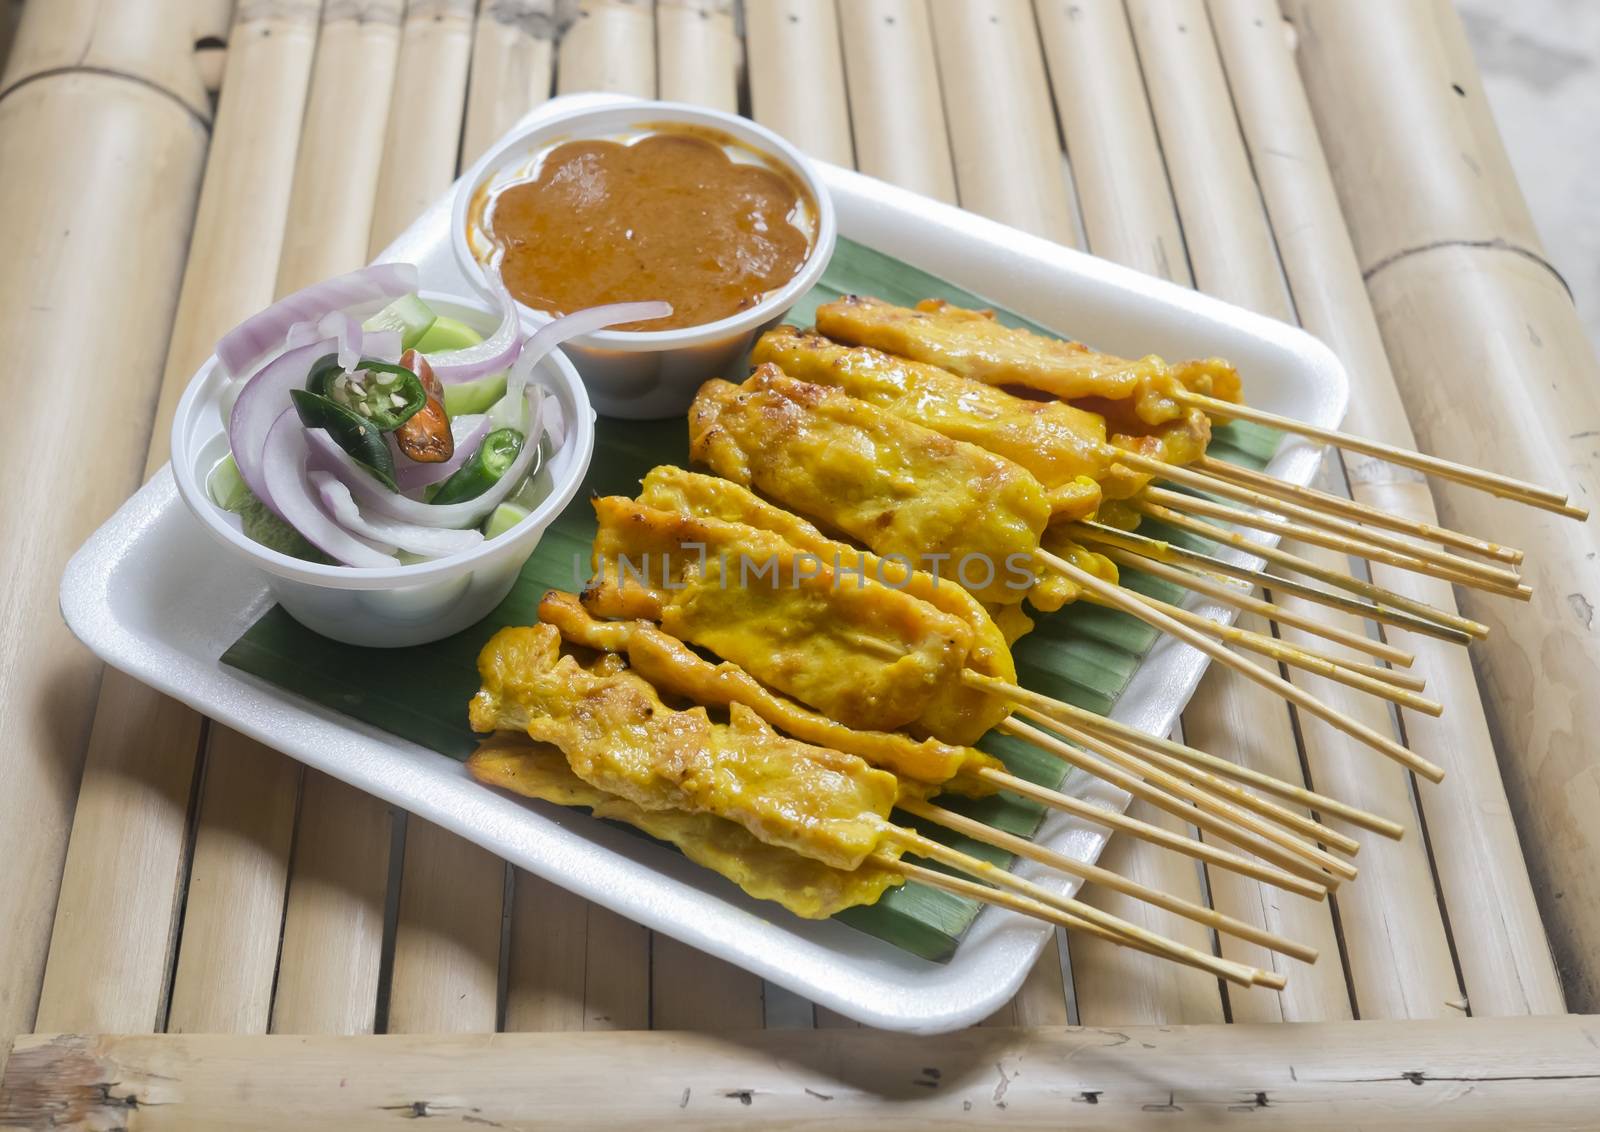 Pork Satay with Peanut Sauce and Cucumber Relish by art9858